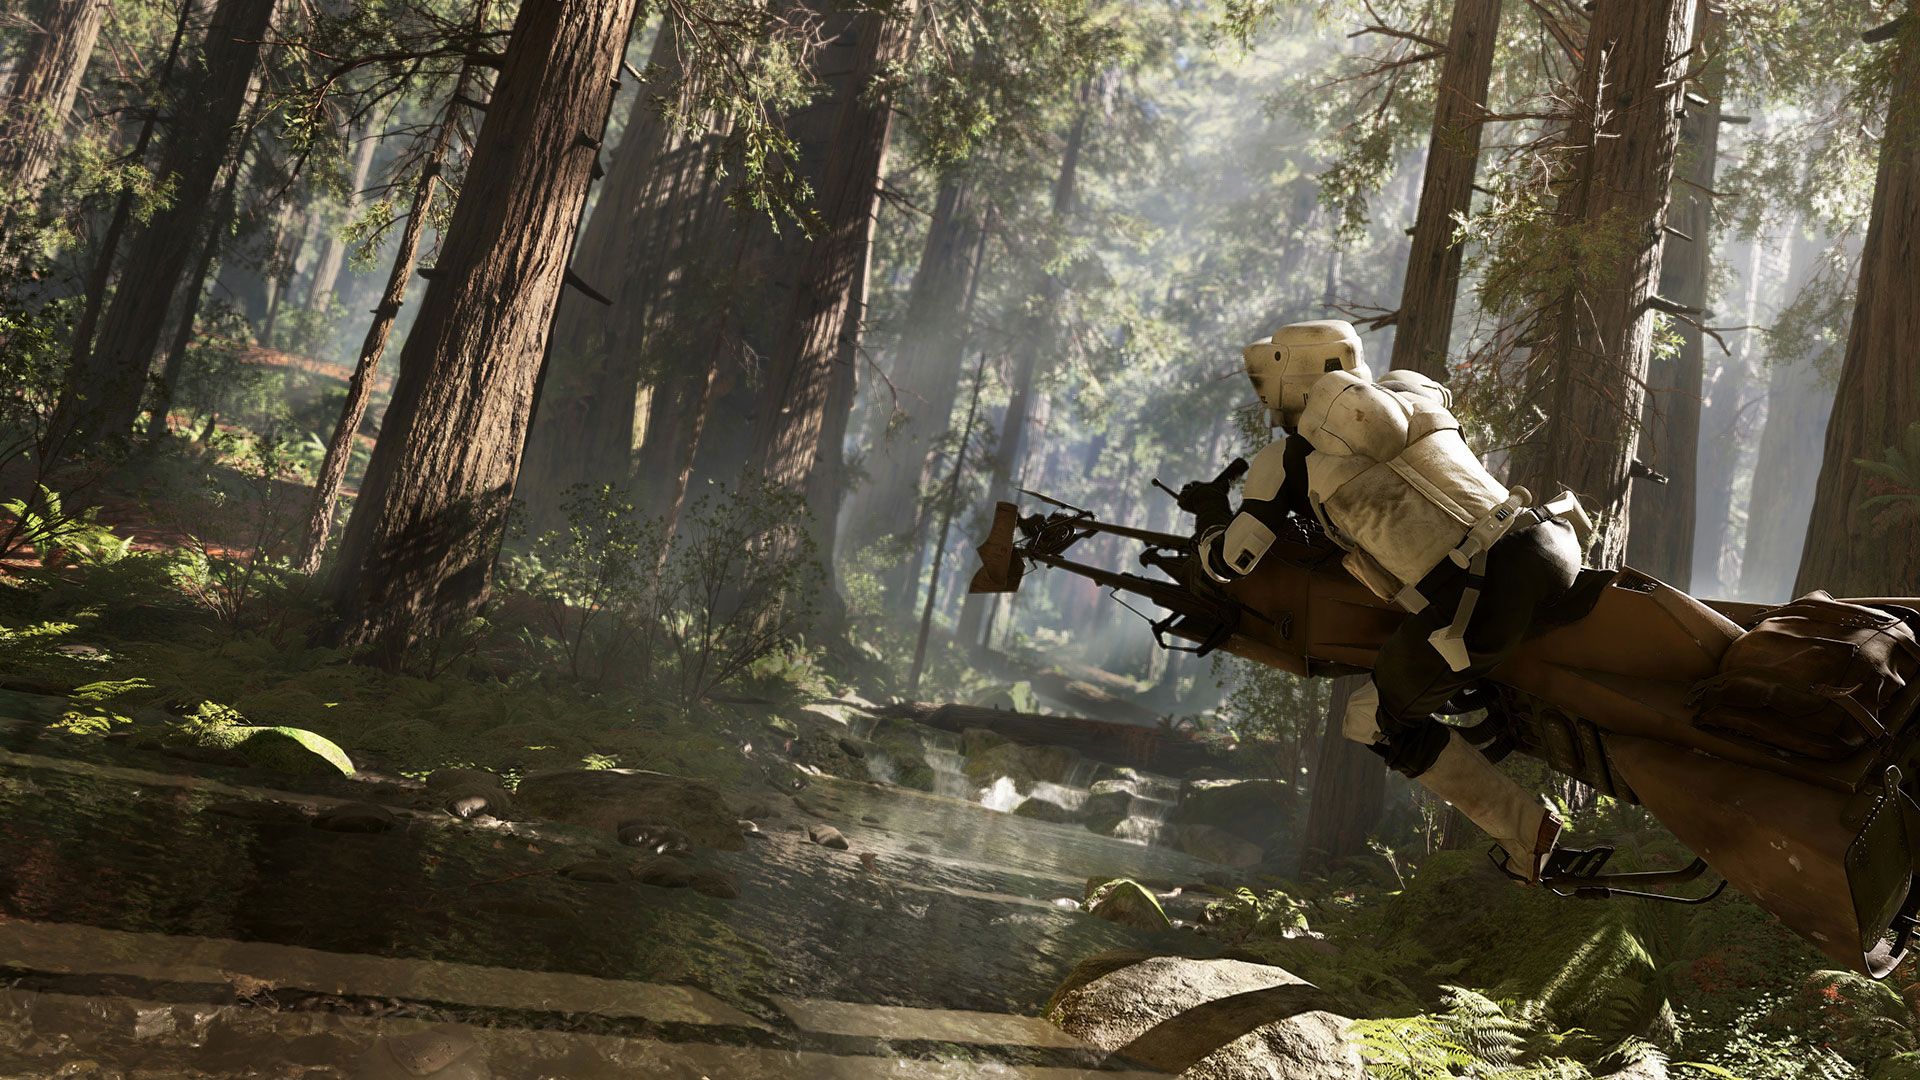 Wallpaper in 1080p from the Star Wars Battlefront webpage